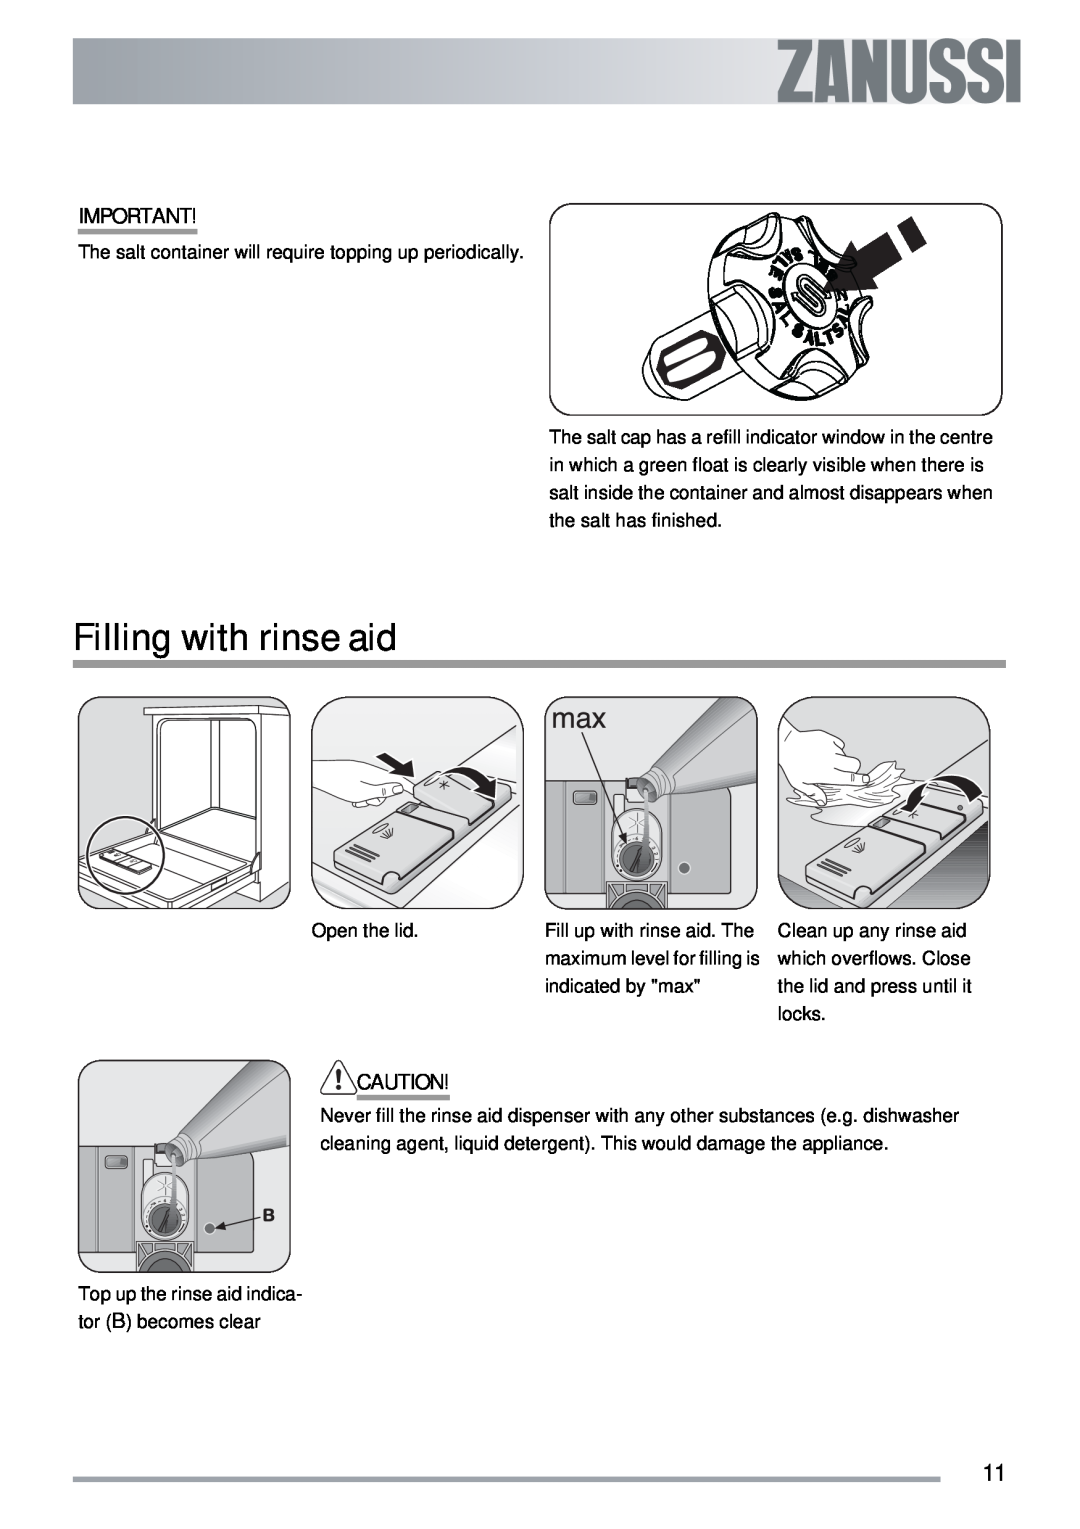 Zanussi ZDT40 user manual Filling with rinse aid, Open the lid, indicated by max 